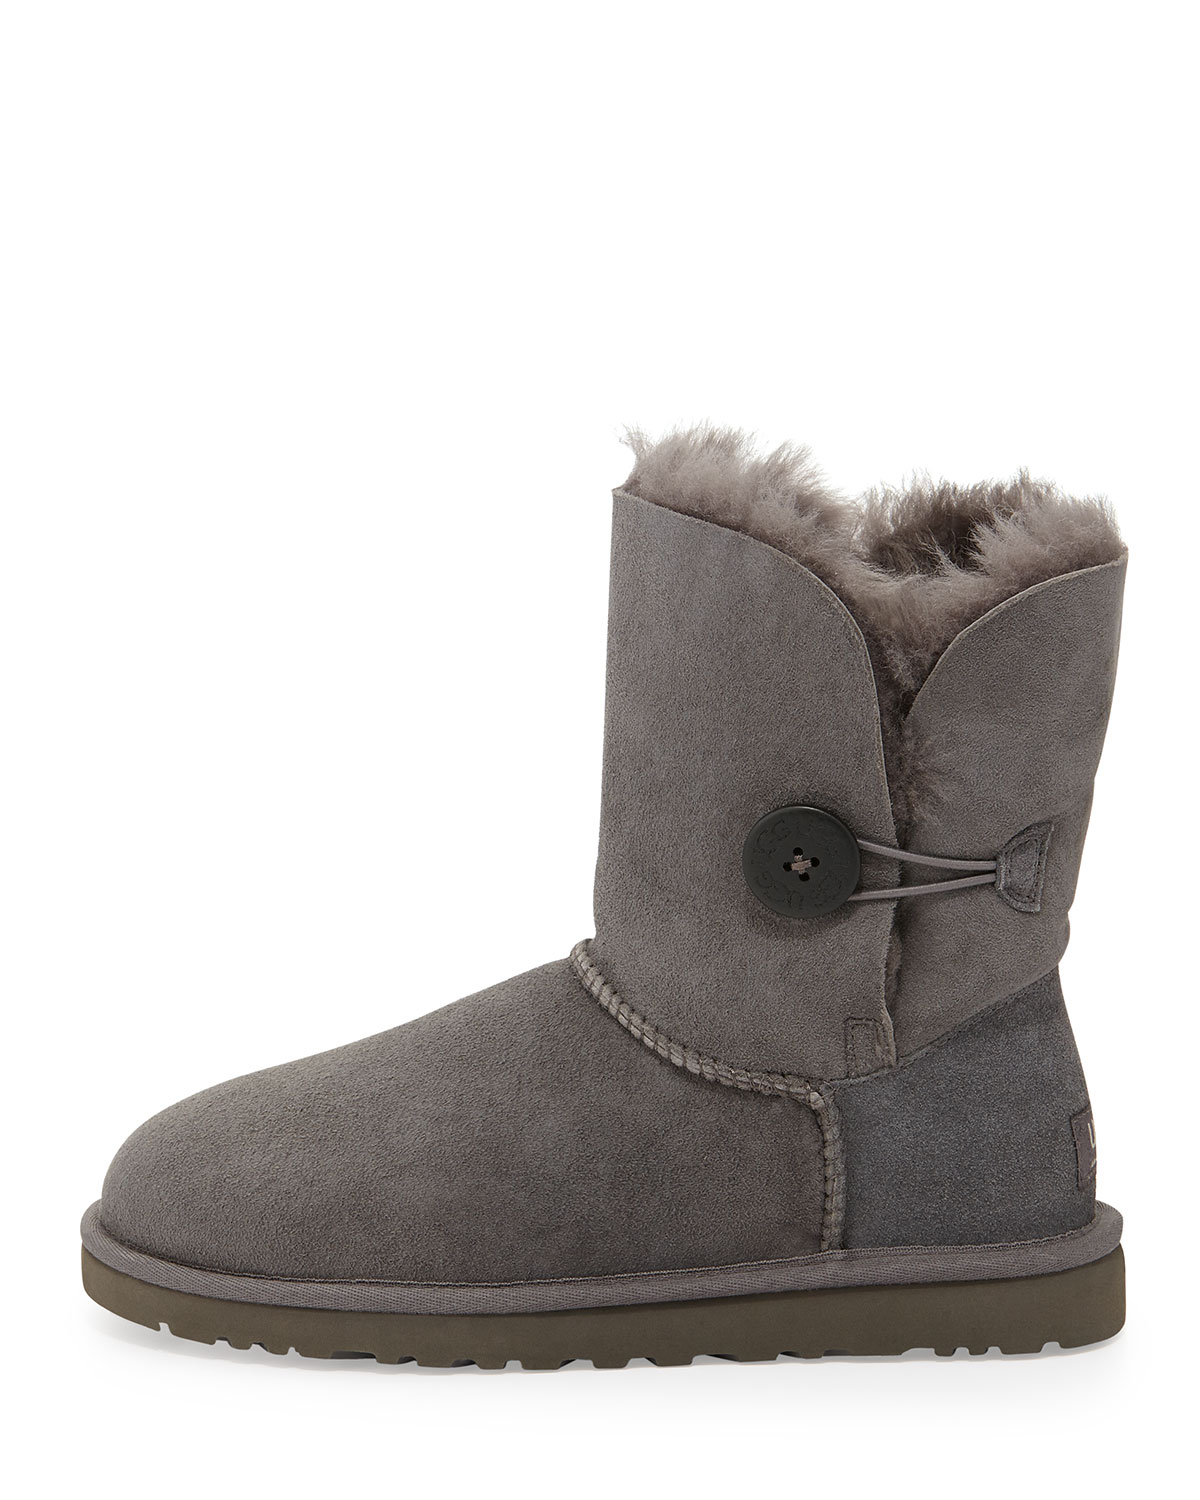 UGG Bailey Single Button Shearling Boots in Grey (Gray) - Lyst